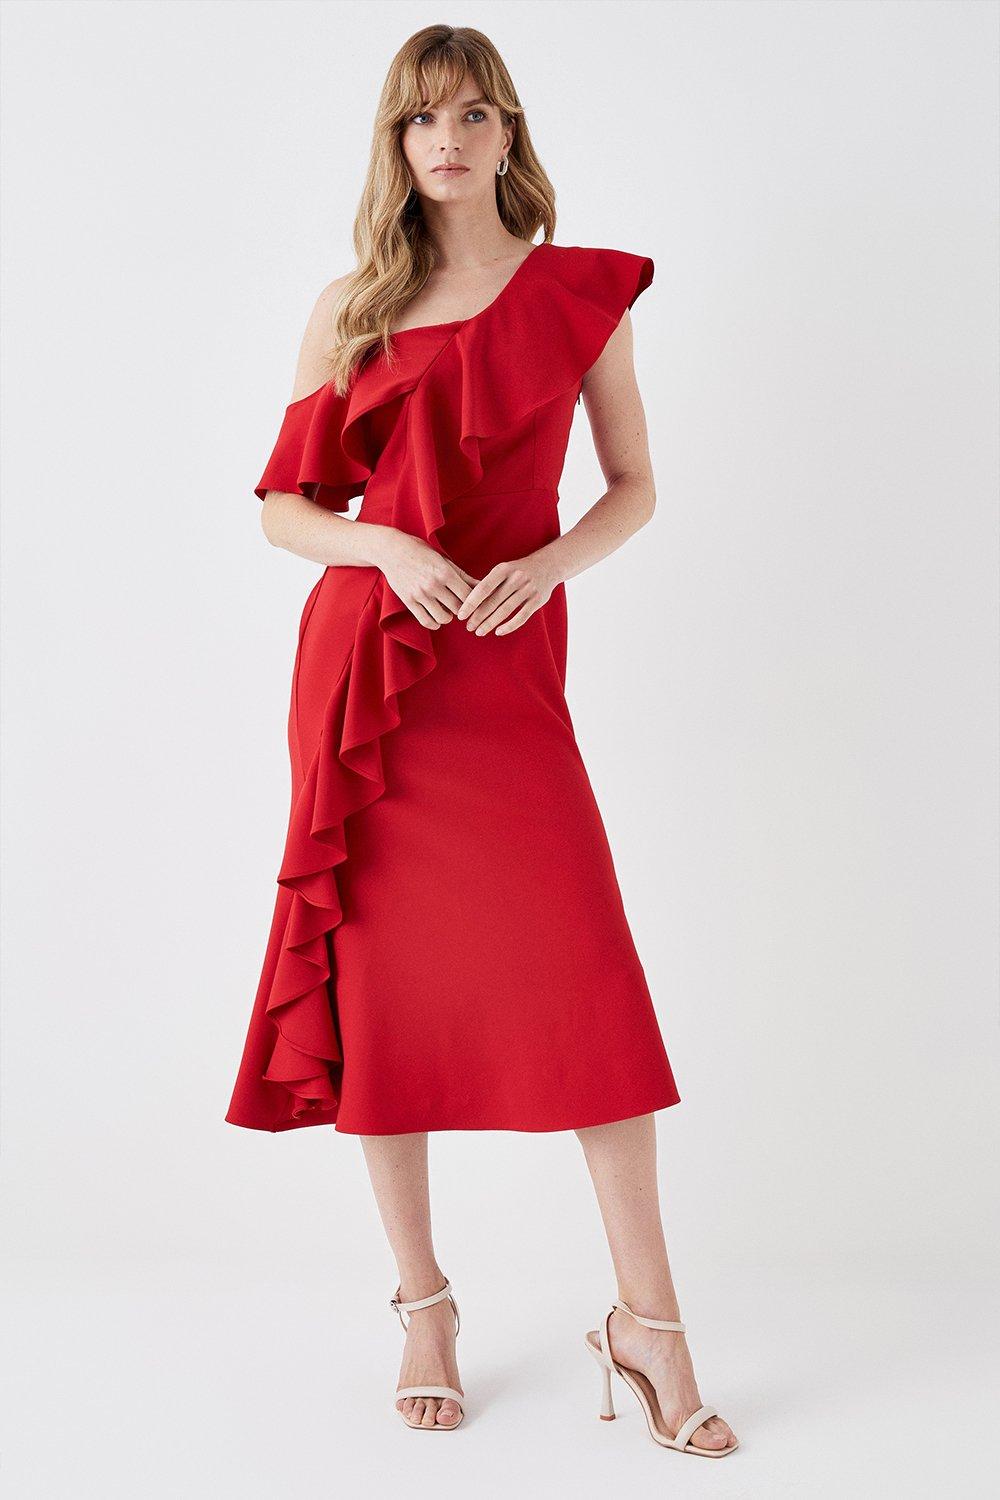 One Shoulder Ruffle Pencil Dress - Red